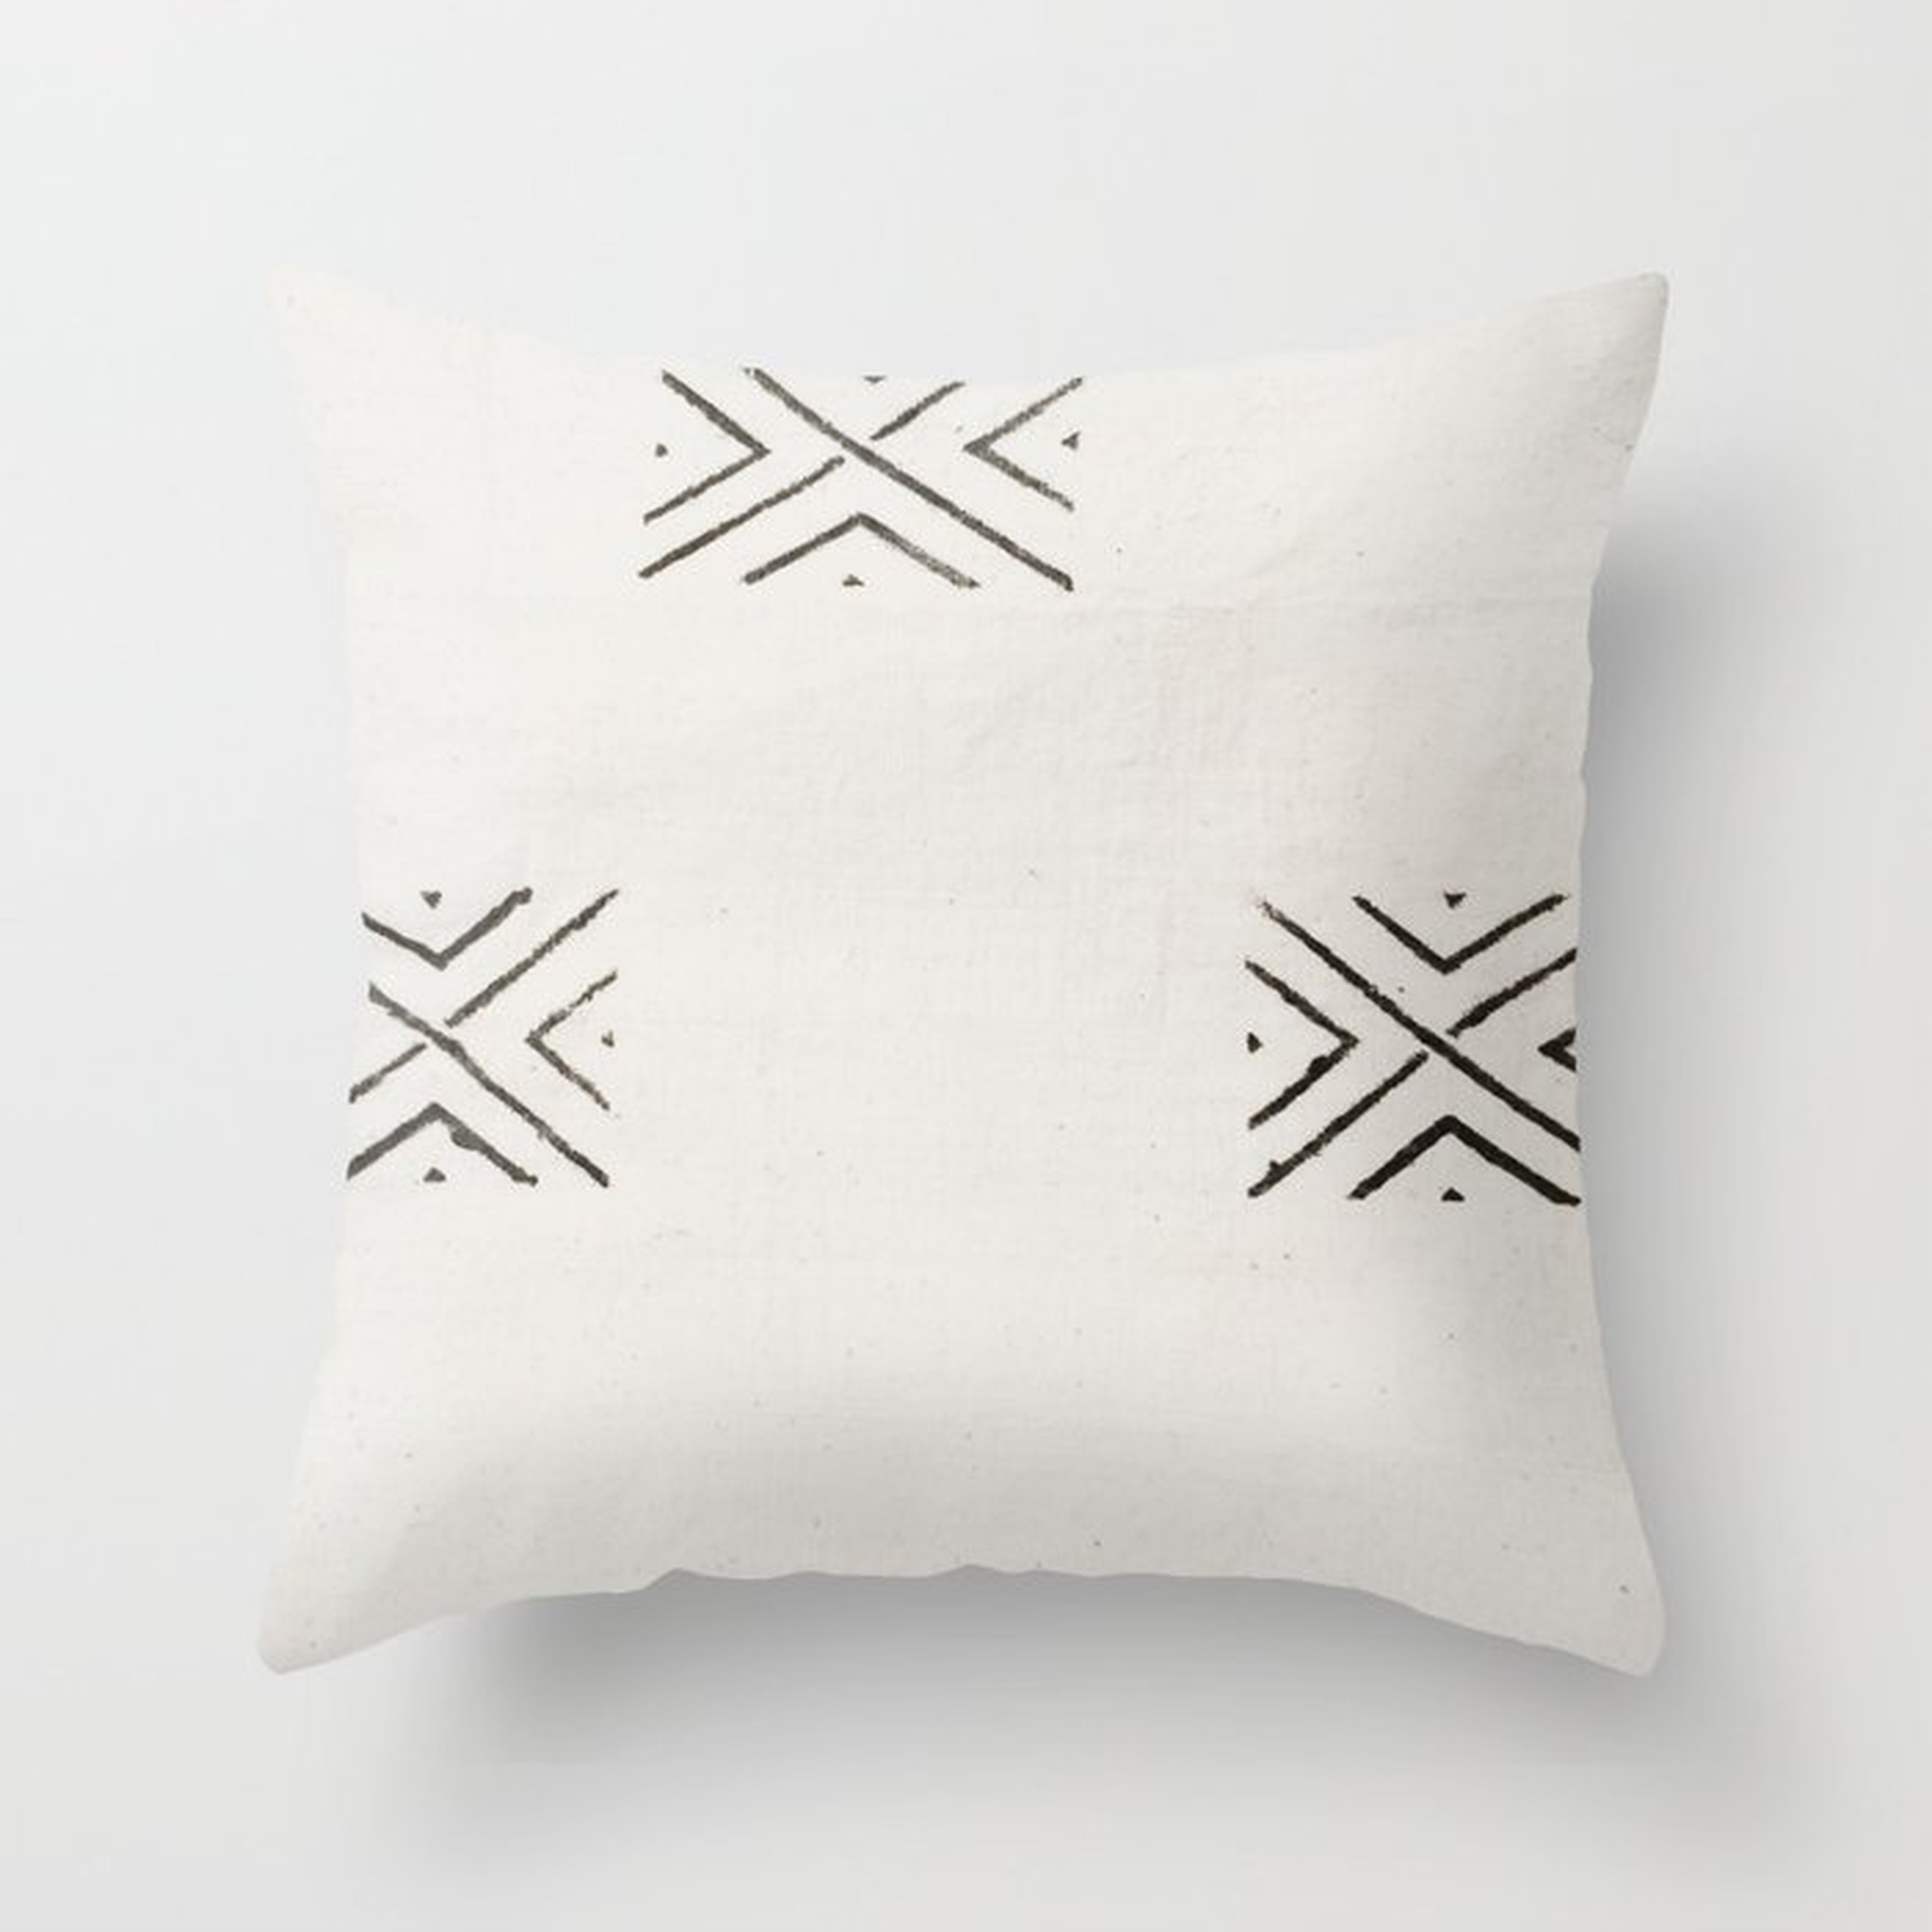 Big X Throw Pillow with insert, Indoor, White & Black, 18" x 18" - Society6